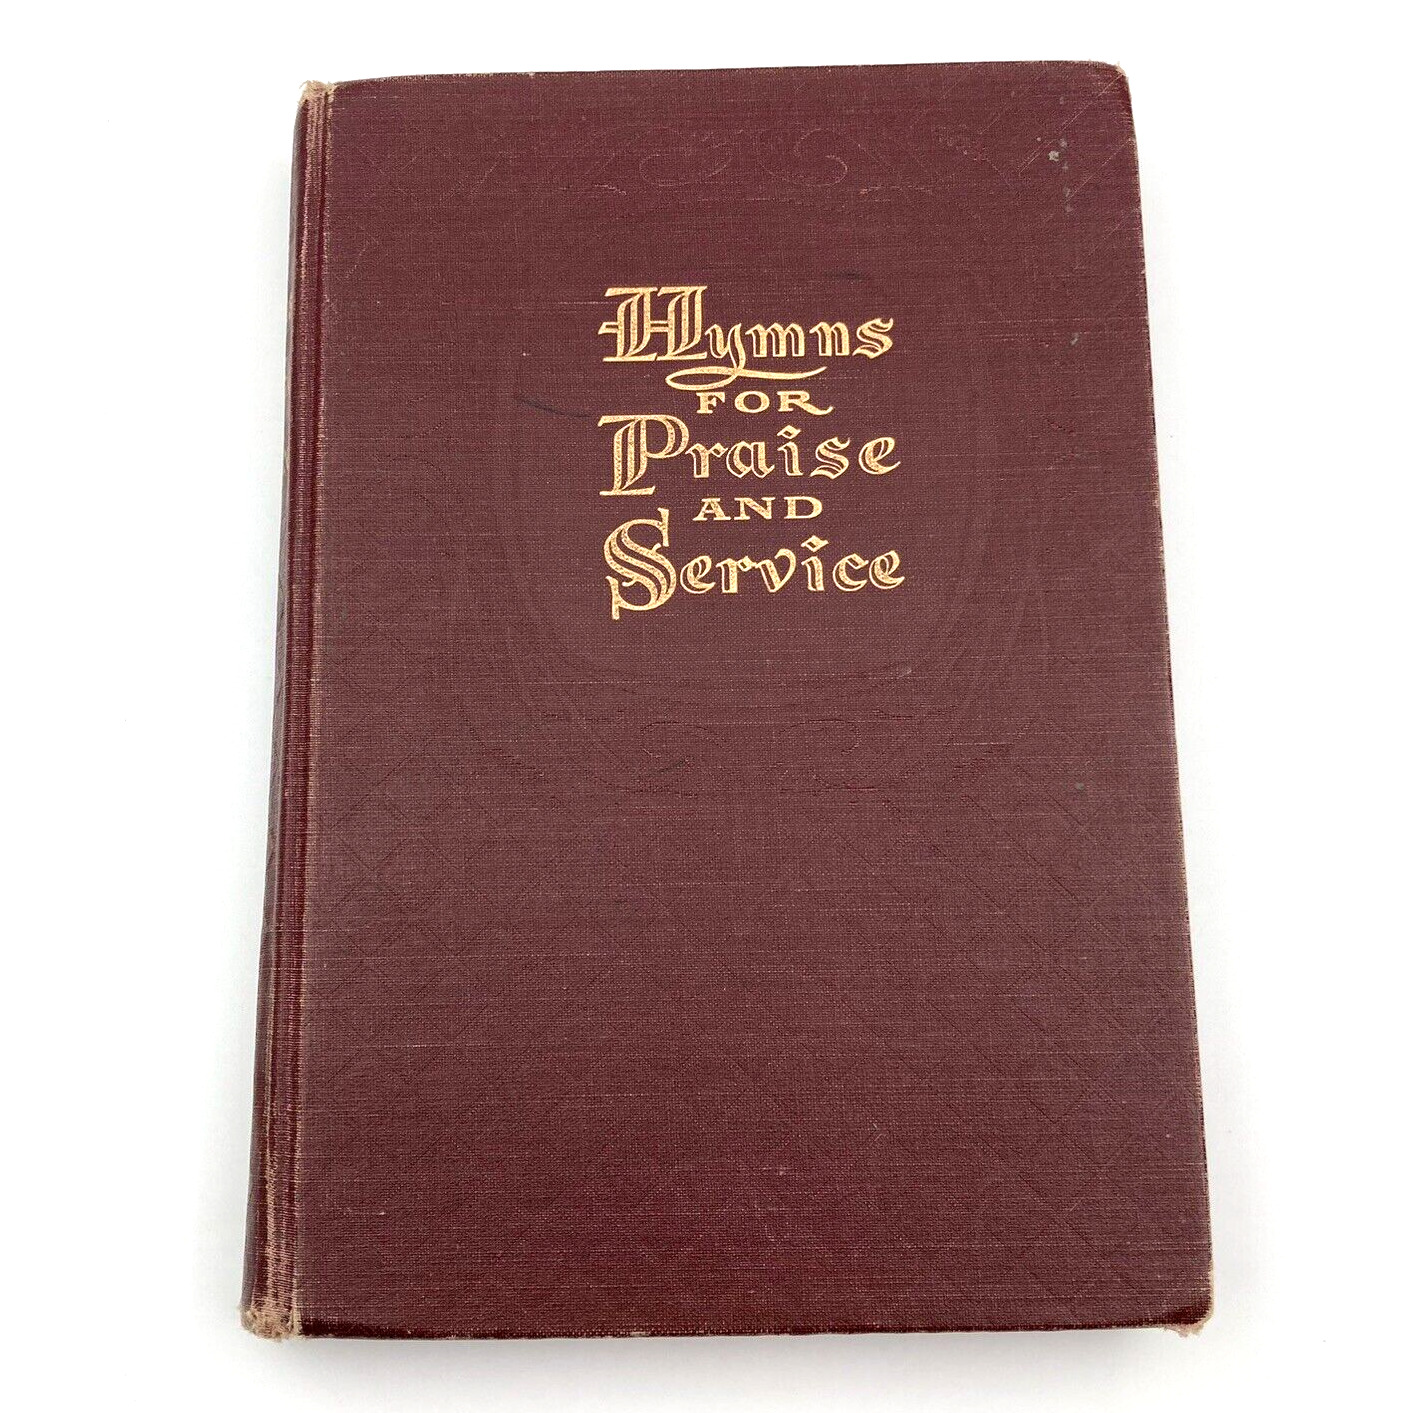 Vintage 1956 Hymns for Praise and Service Hardcover Christian Hymnal Prayer Book